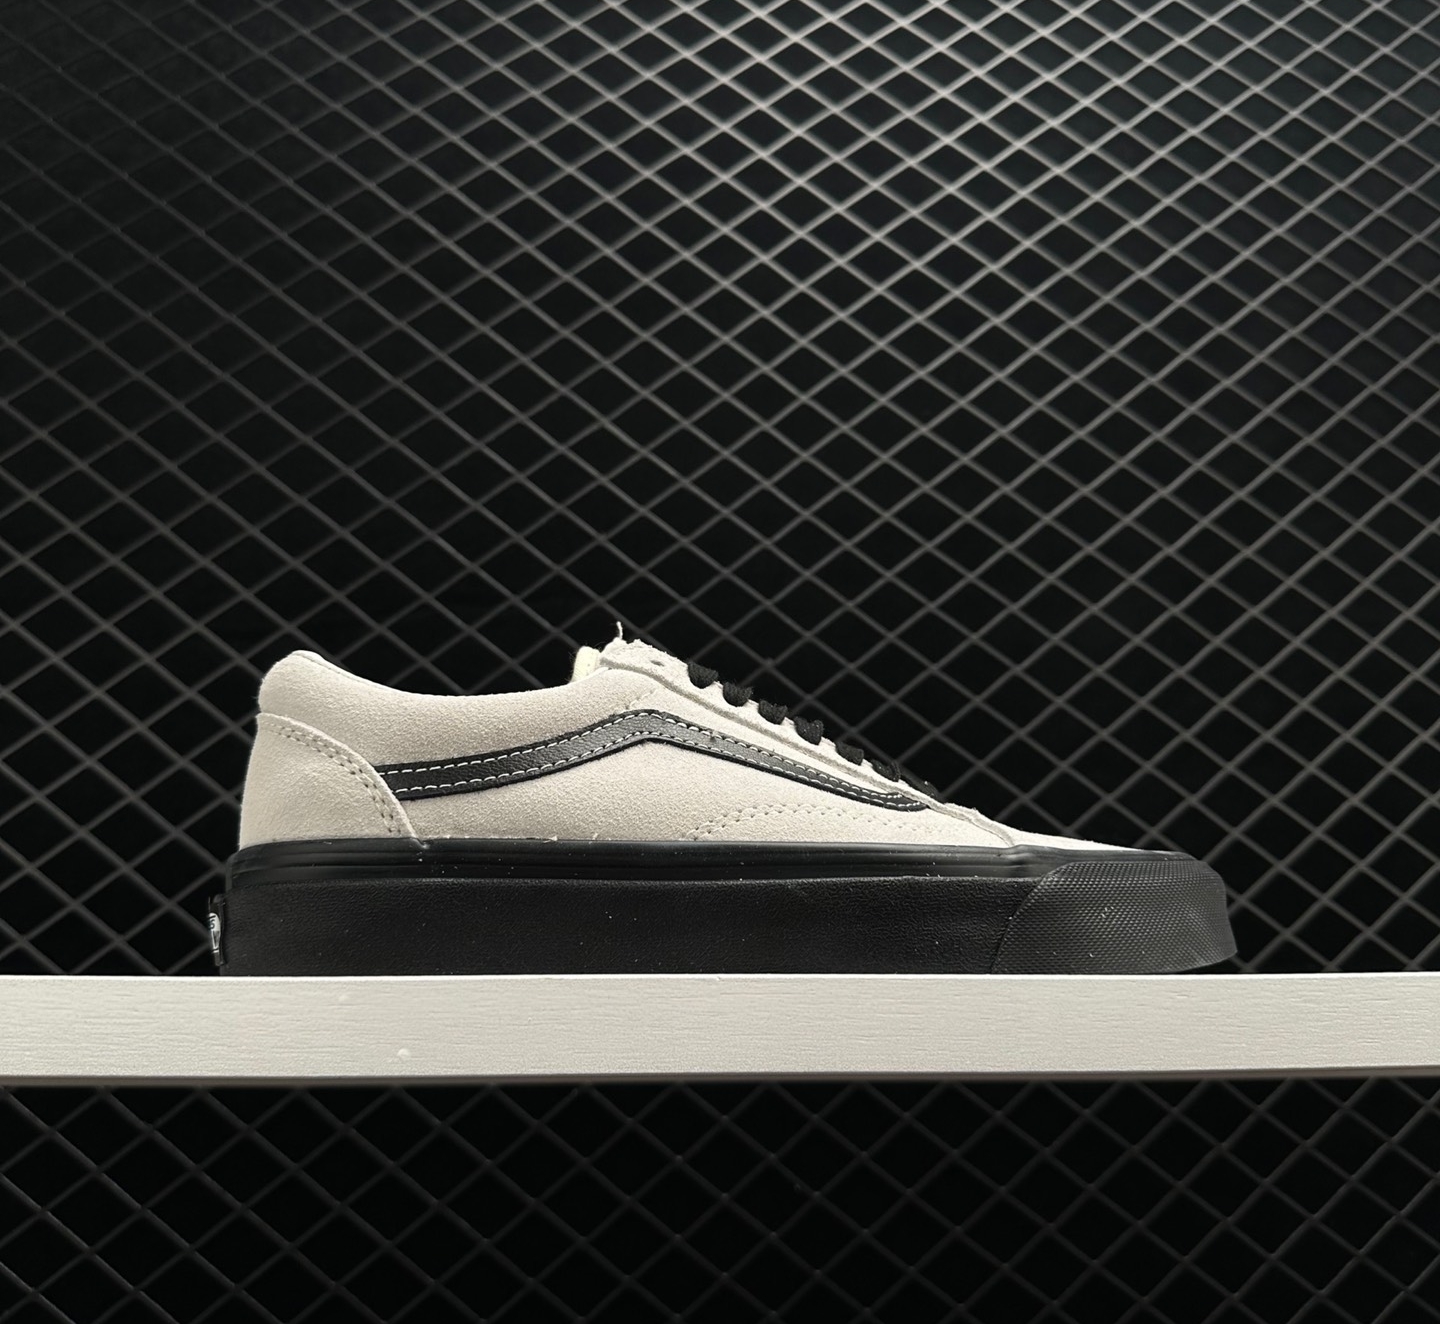 Vans Style 36 Sneakers White Black - Shop Now!